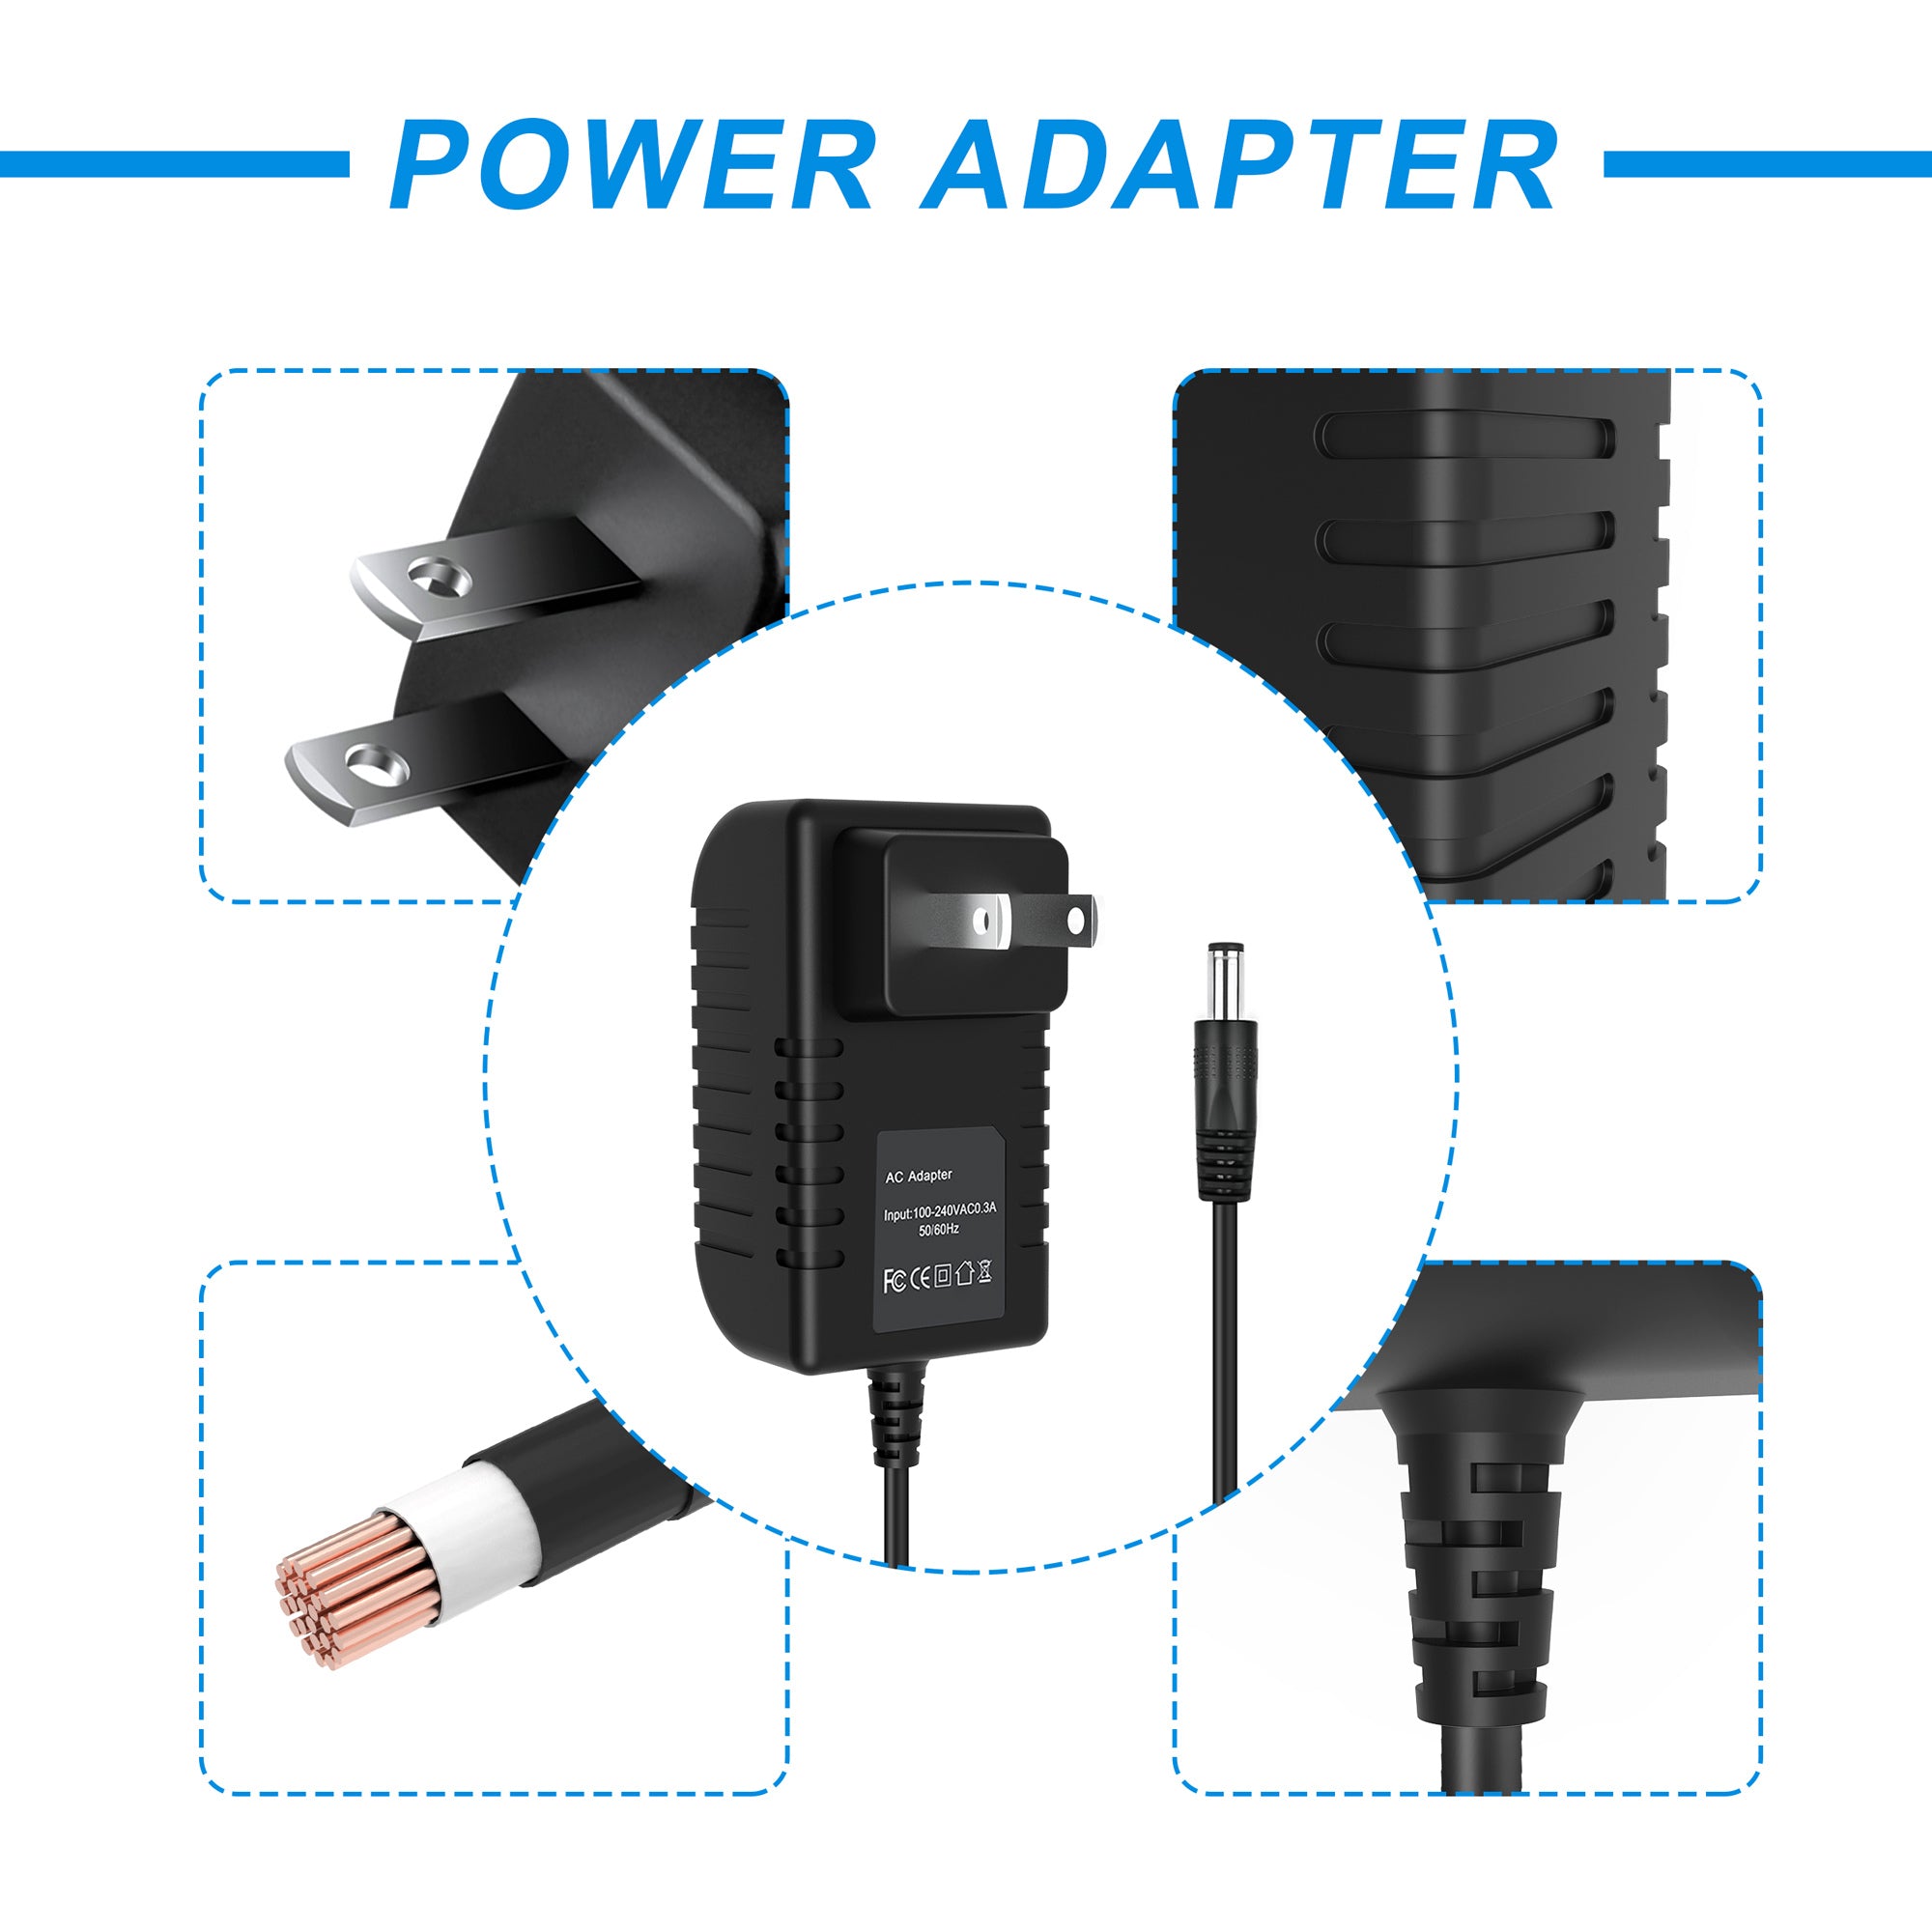 AbleGrid 7.5V AC/DC Adapter Compatible with Hon Kwang Model: D7300 Plug in Class 2 Transformer 7.5VDC